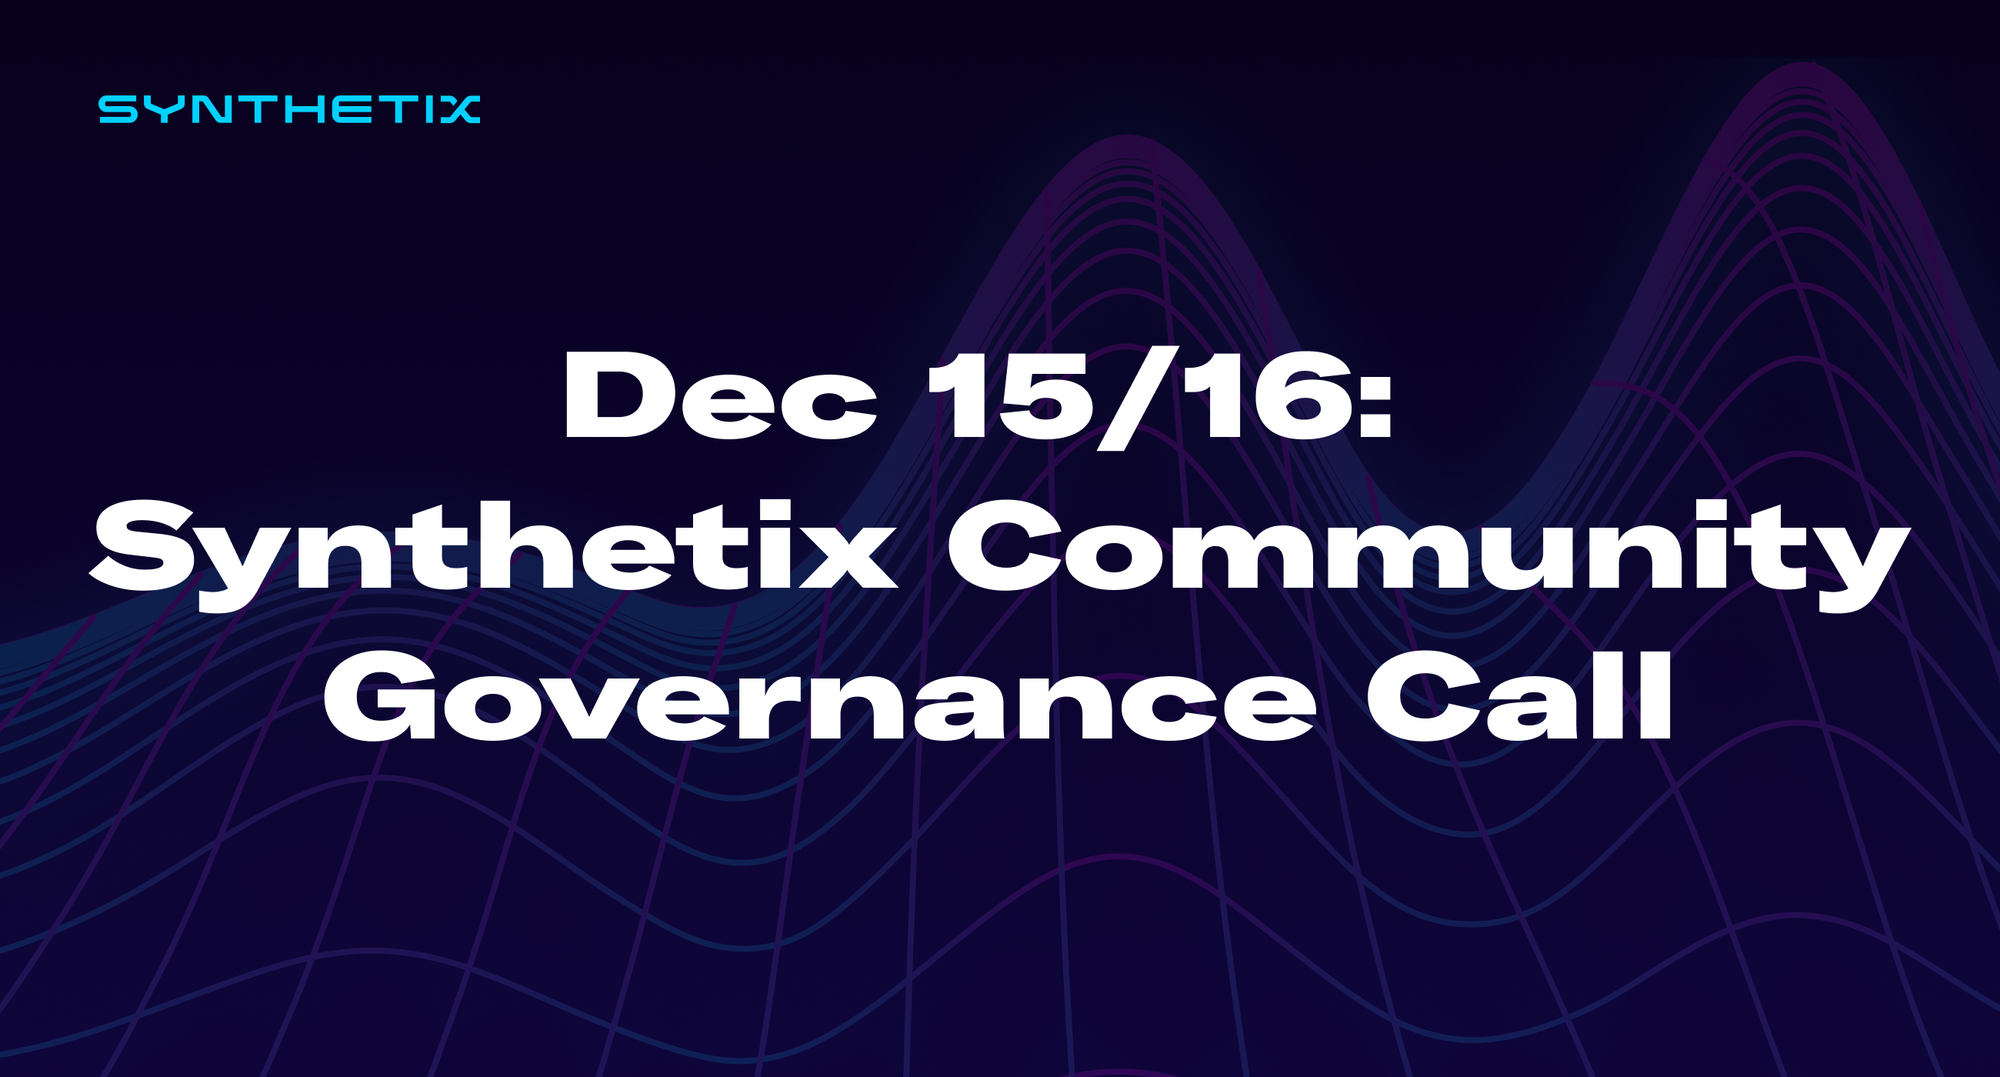 Come join us on Dec 15/ Dec 16 for the next Synthetix community governance call!